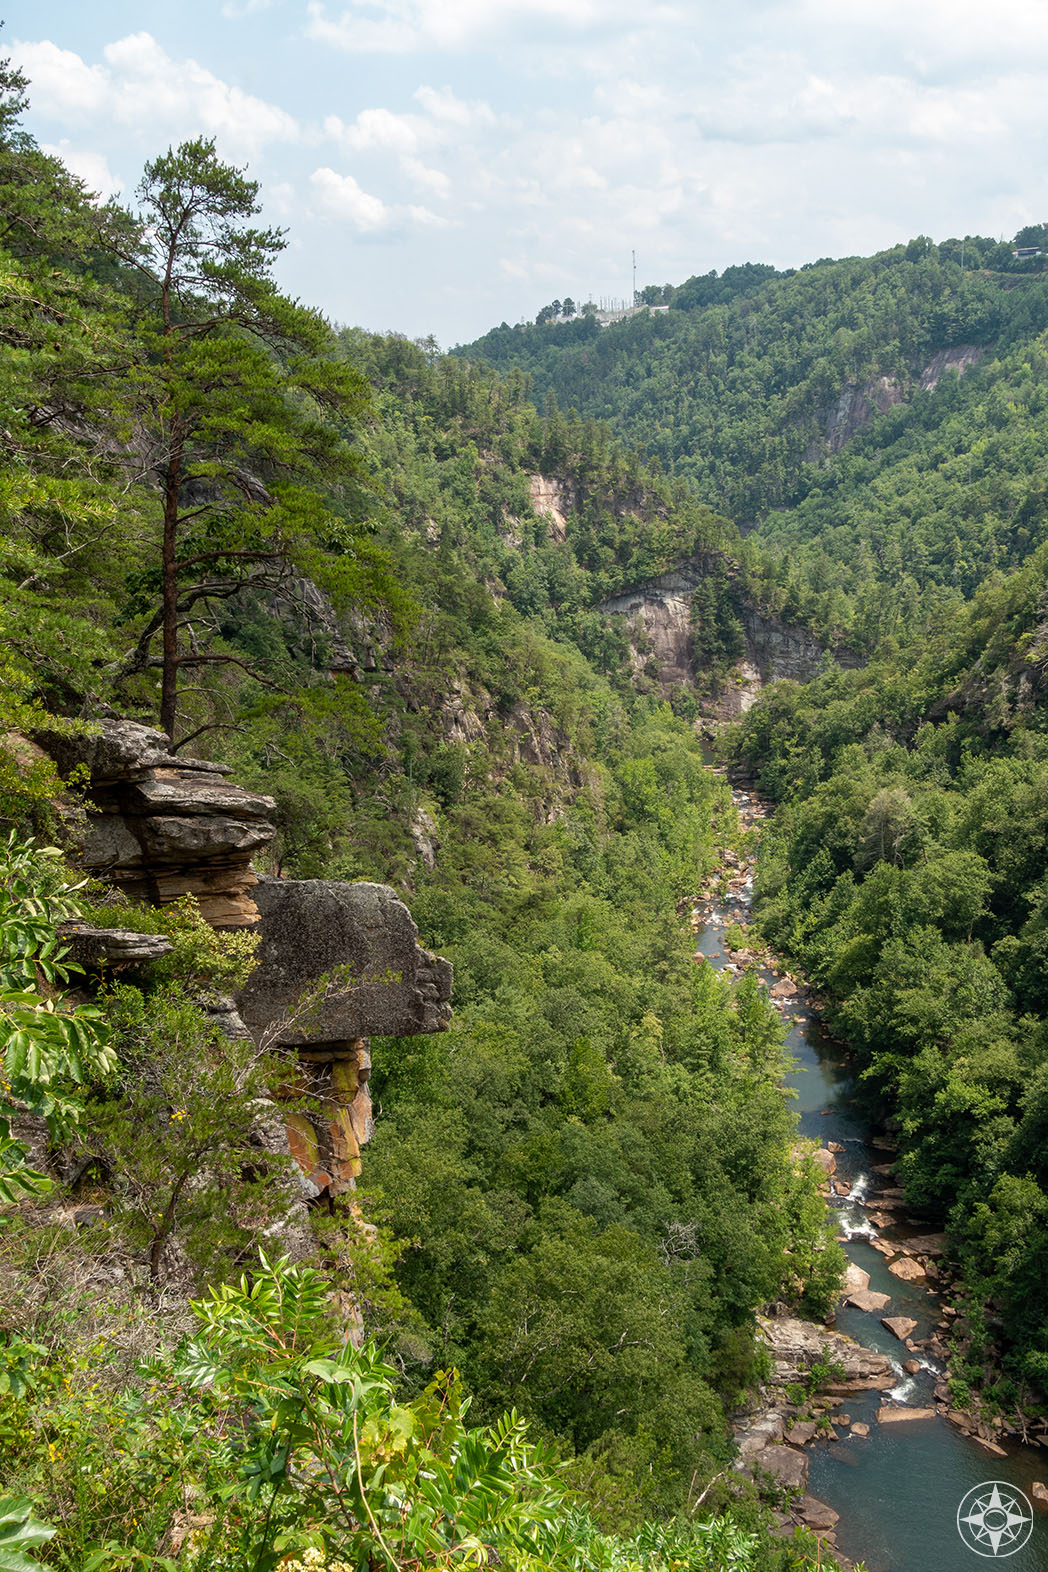 Why not take a moment and be amazed how the Tallulah River could carve this canyon out of the Tallulah Dome rock